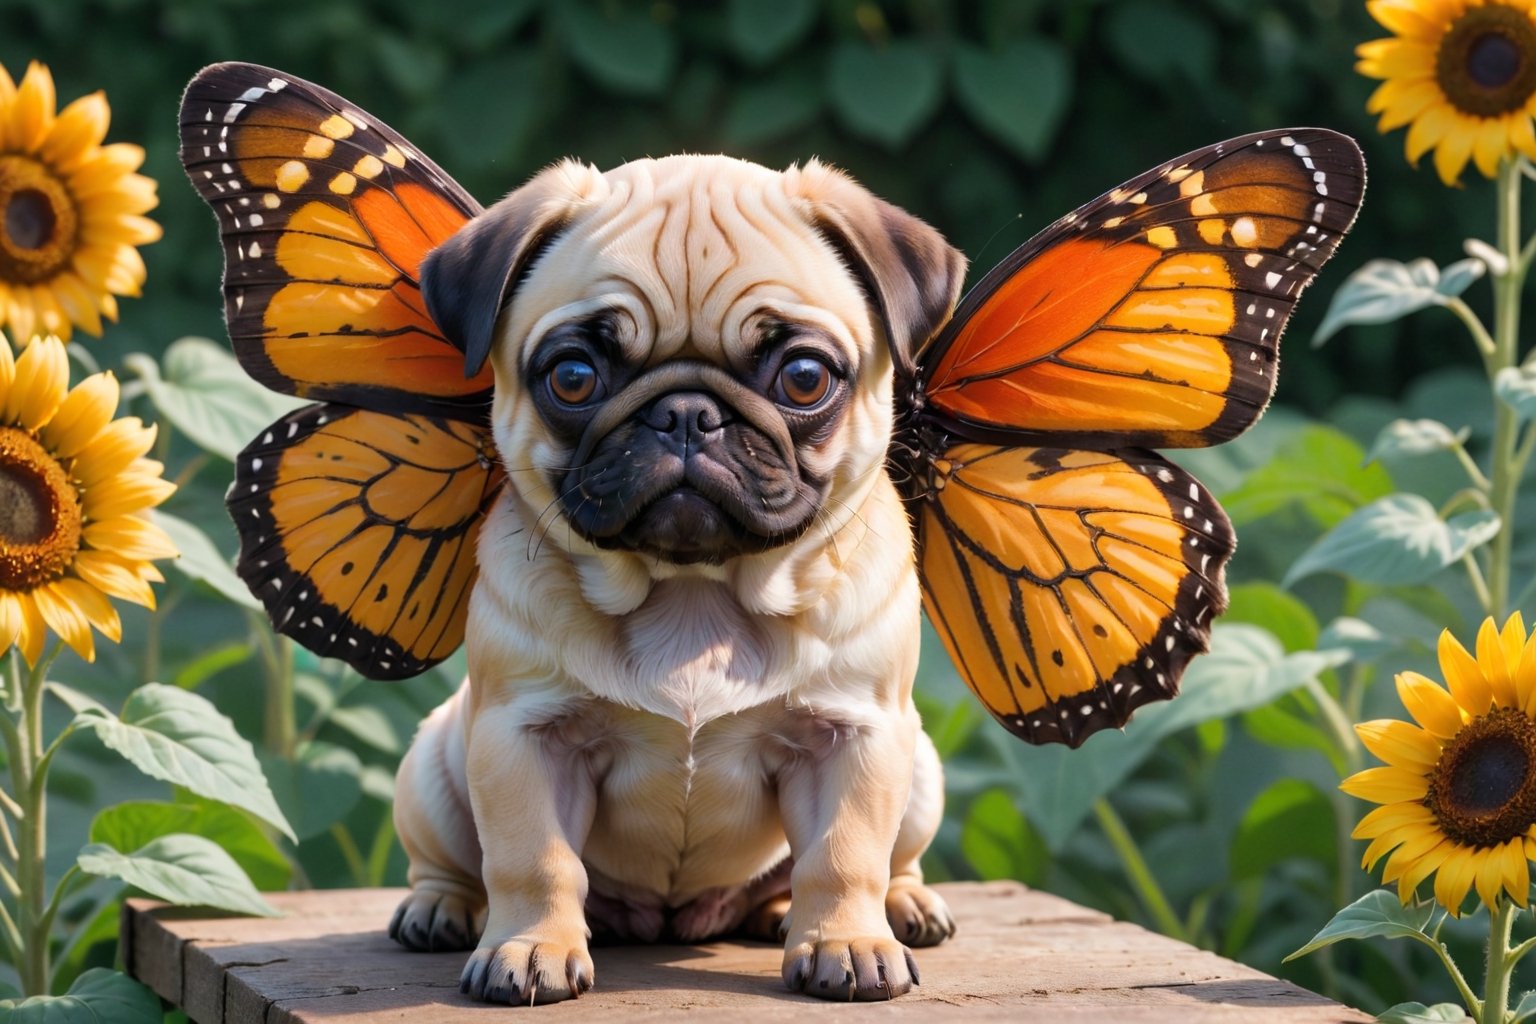 * A curious pug puppy, with its characteristic wrinkles and folded ears, investigates a giant monarch butterfly perched on a sunflower. The butterfly's large wings, decorated with orange and black patterns, dwarf the curious pup, who tilts its head in fascination.
 
